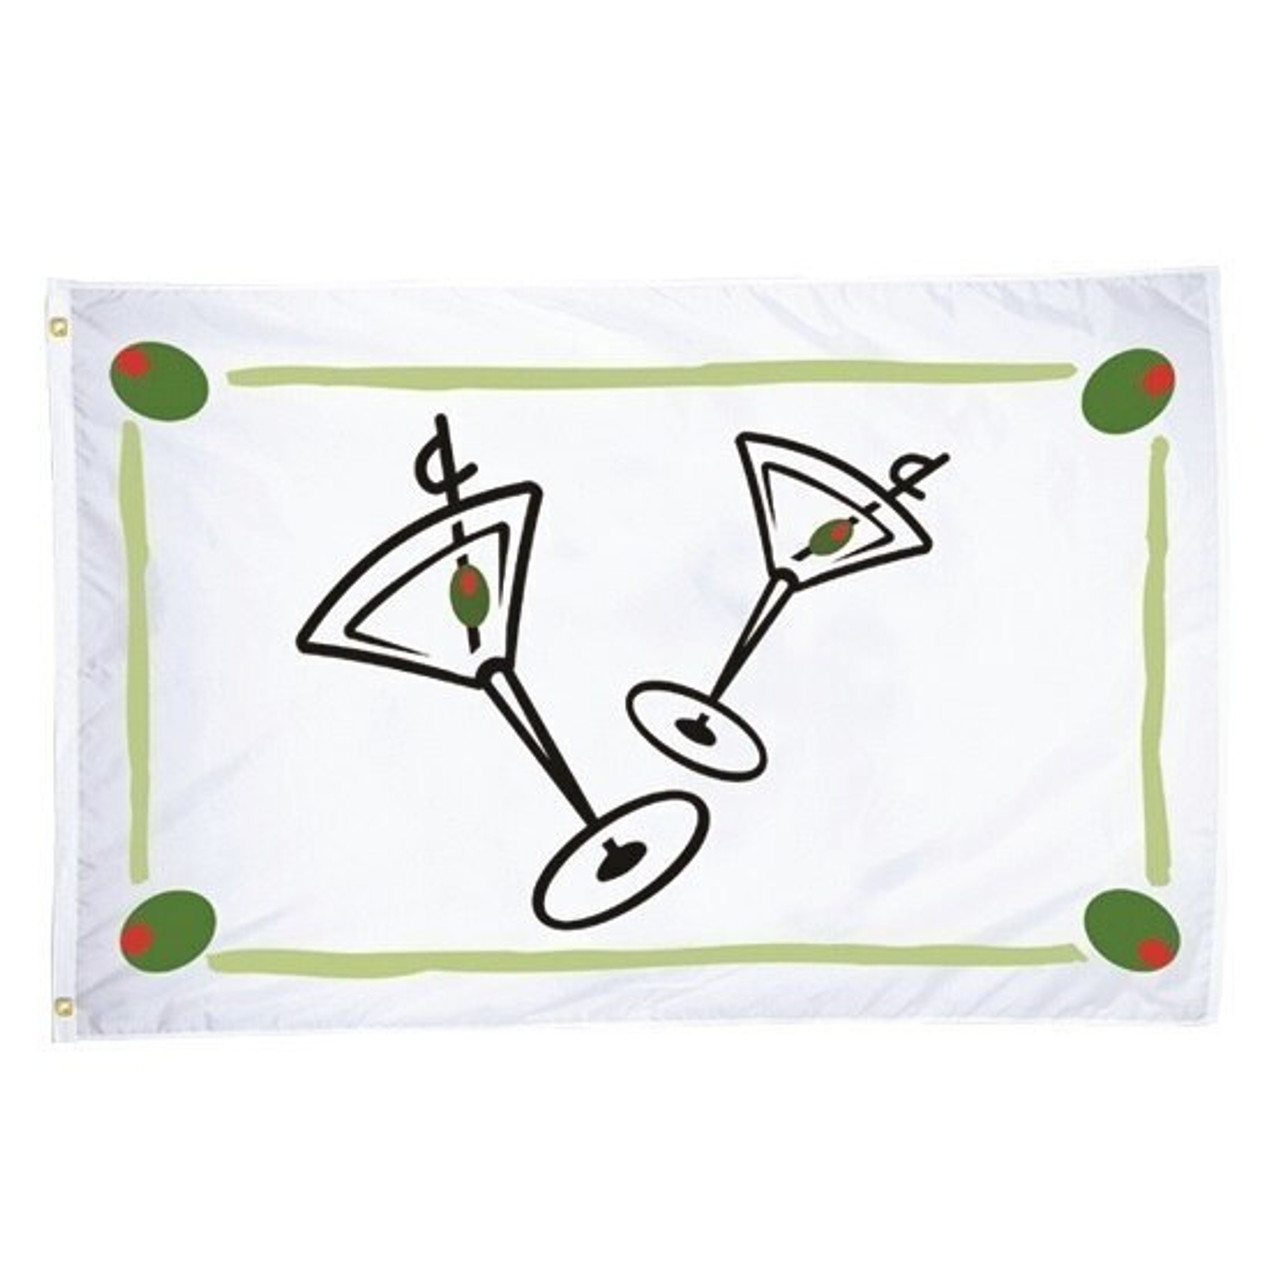 Small boat flag with 2 martini glasses and olives in the center and green border with olives in corners.